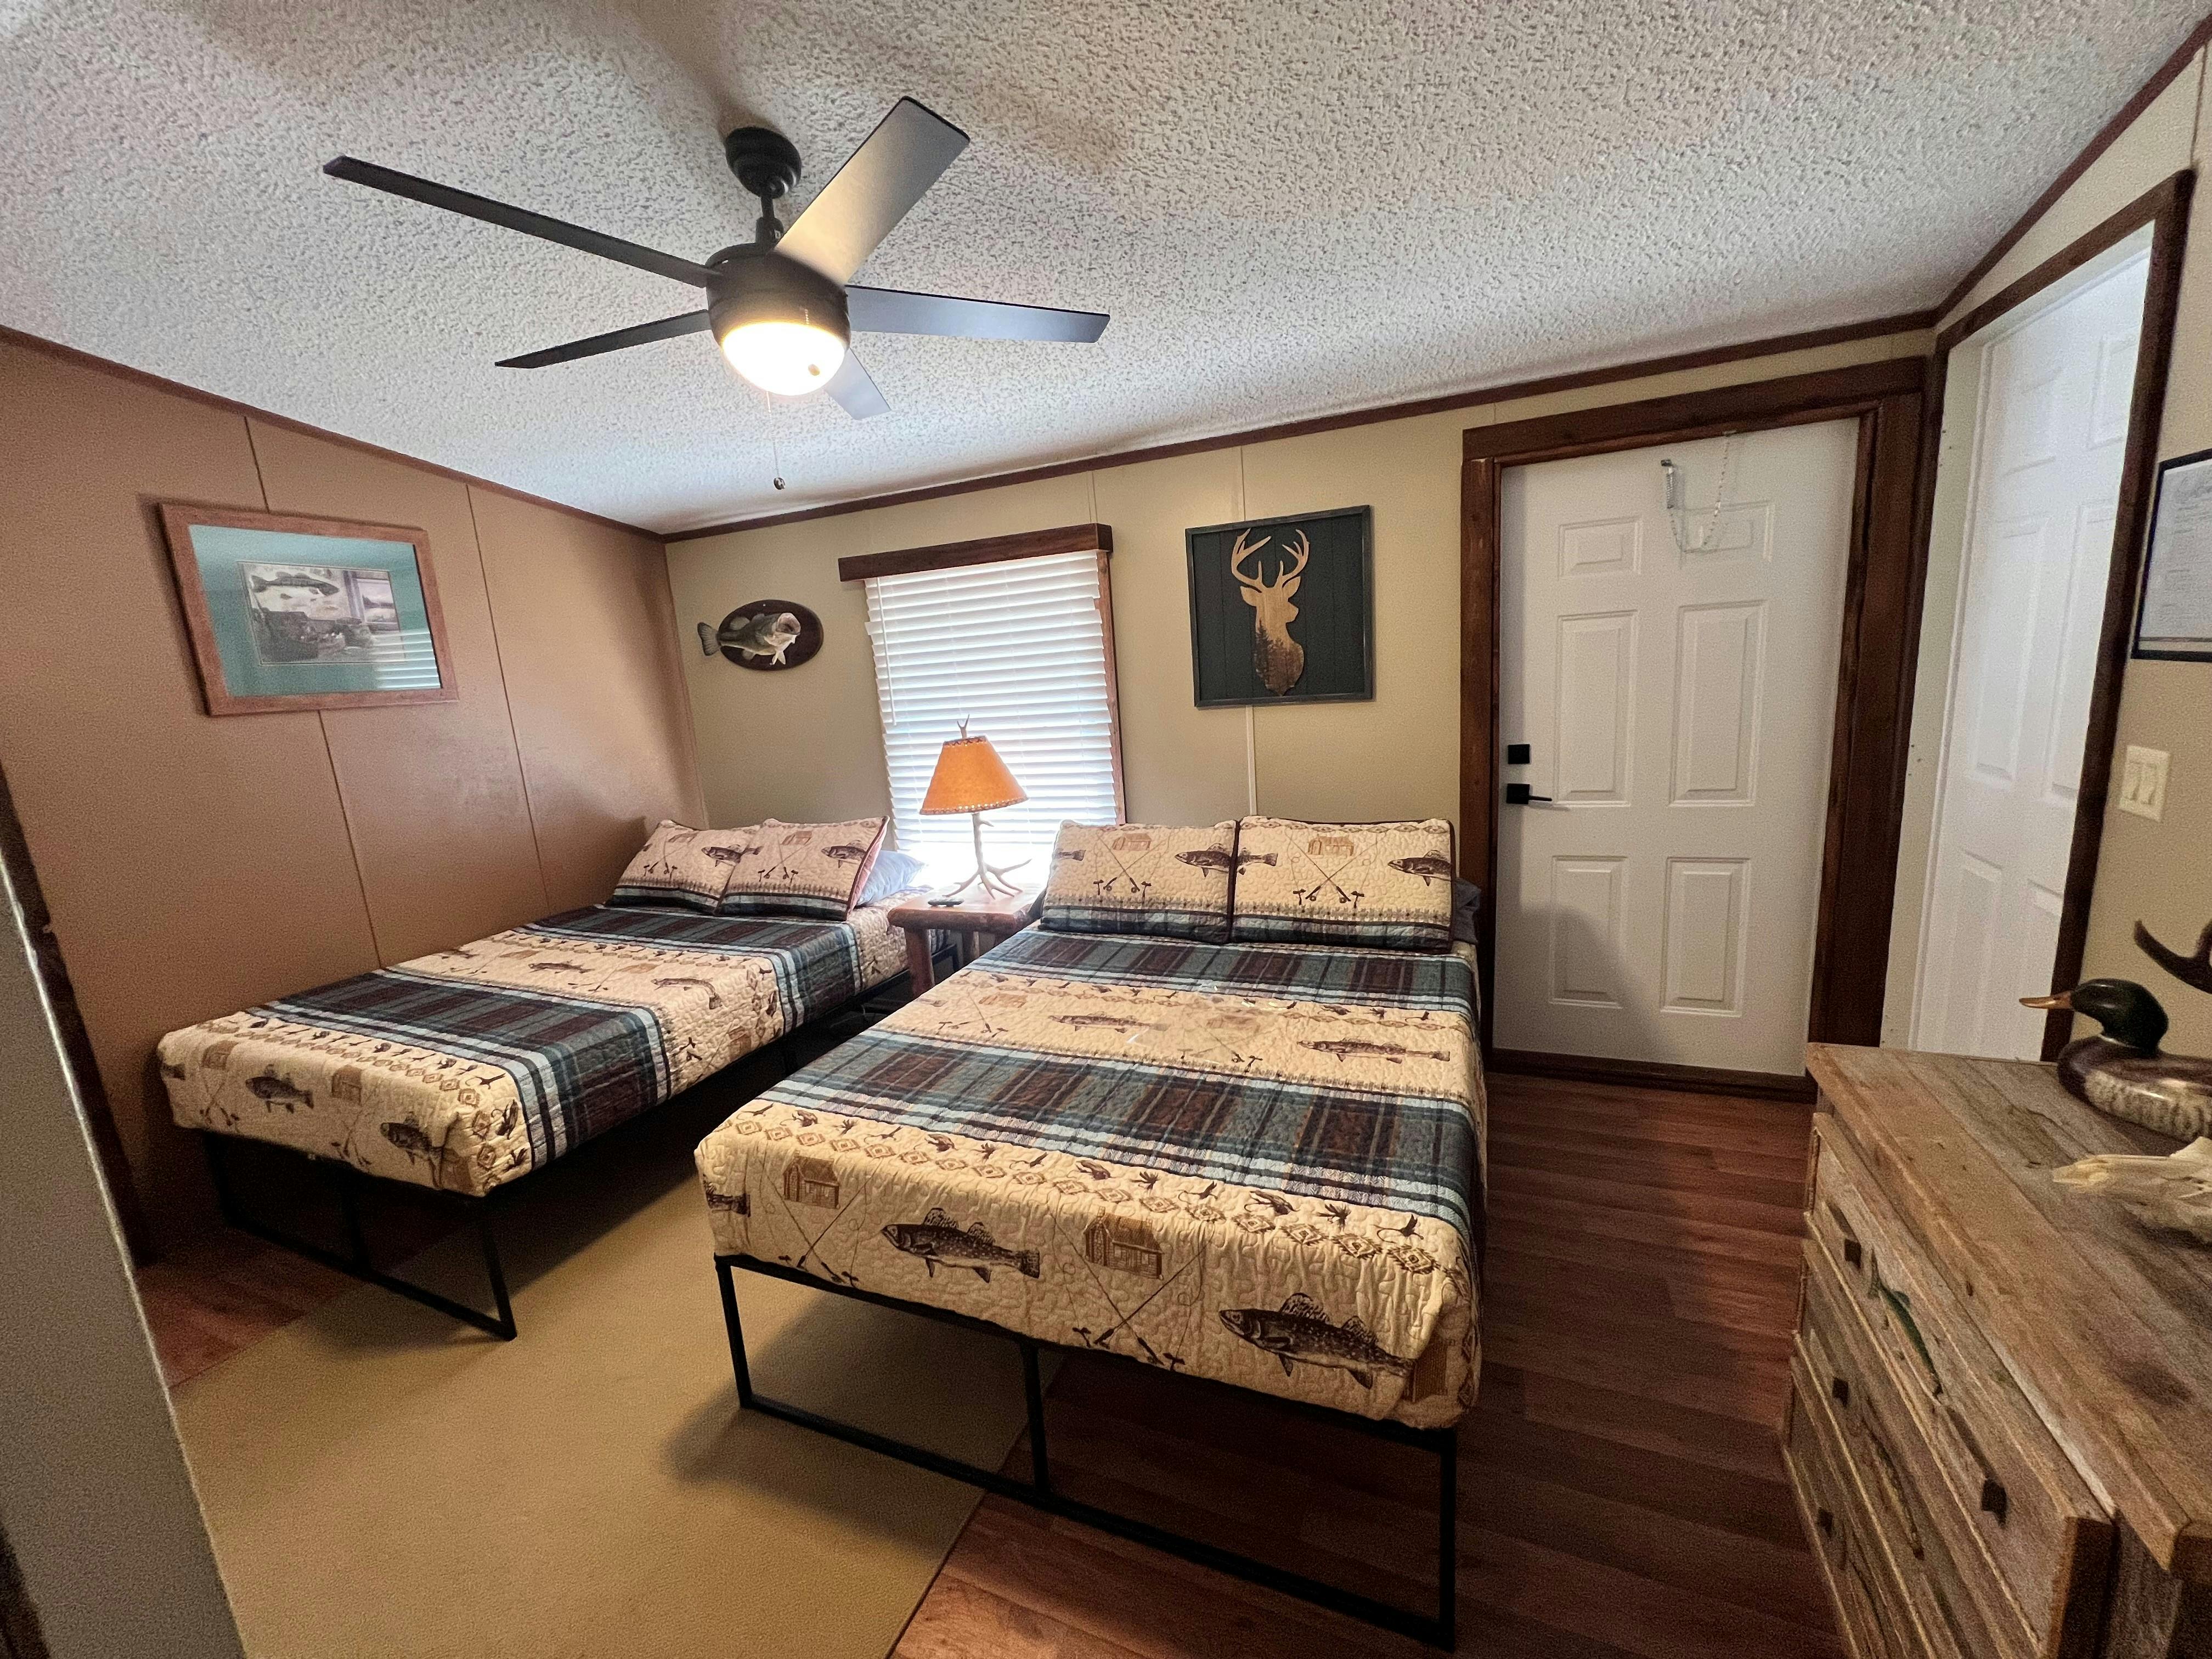 Gone Fishing and Hunting (2 Full Bed Suite w/kitchenette) - $119 Total